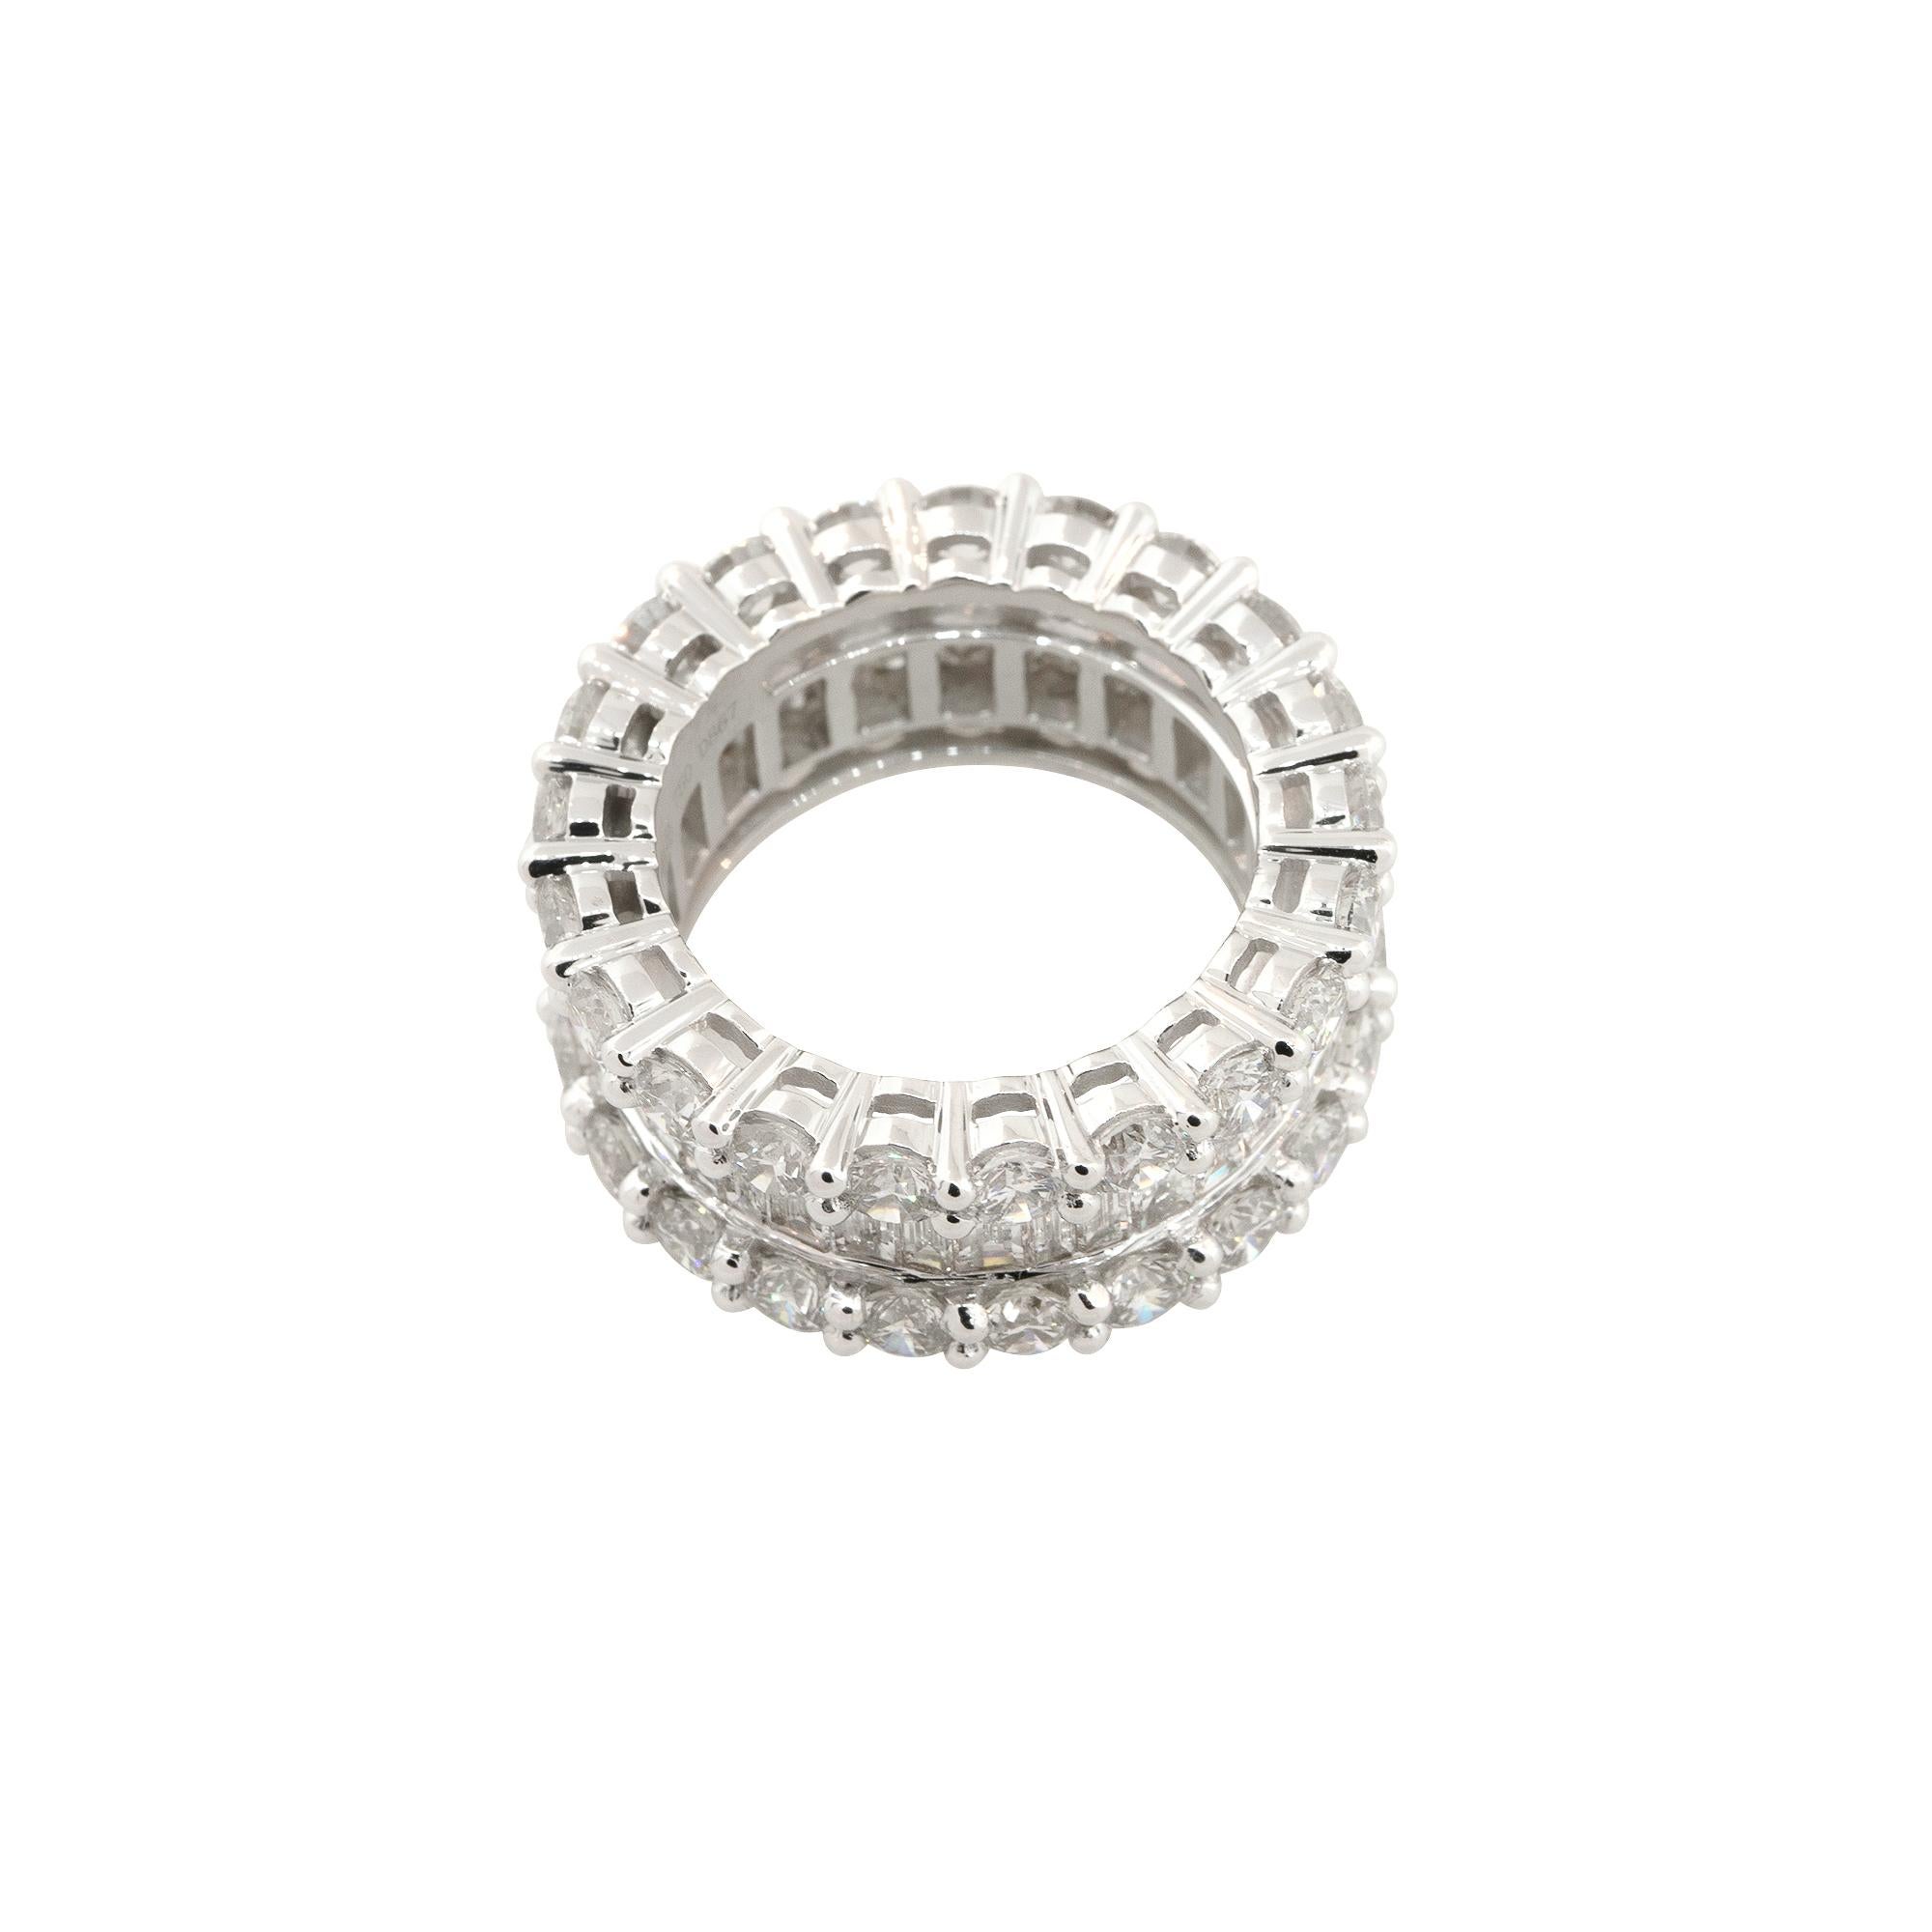 18k White Gold 8.67ctw Round and Baguette Cut Diamond Eternity Band

Raymond Lee Jewelers in Boca Raton -- South Florida’s destination for diamonds, fine jewelry, antique jewelry, estate pieces, and vintage jewels.

Style: Women's 3-Row Diamond